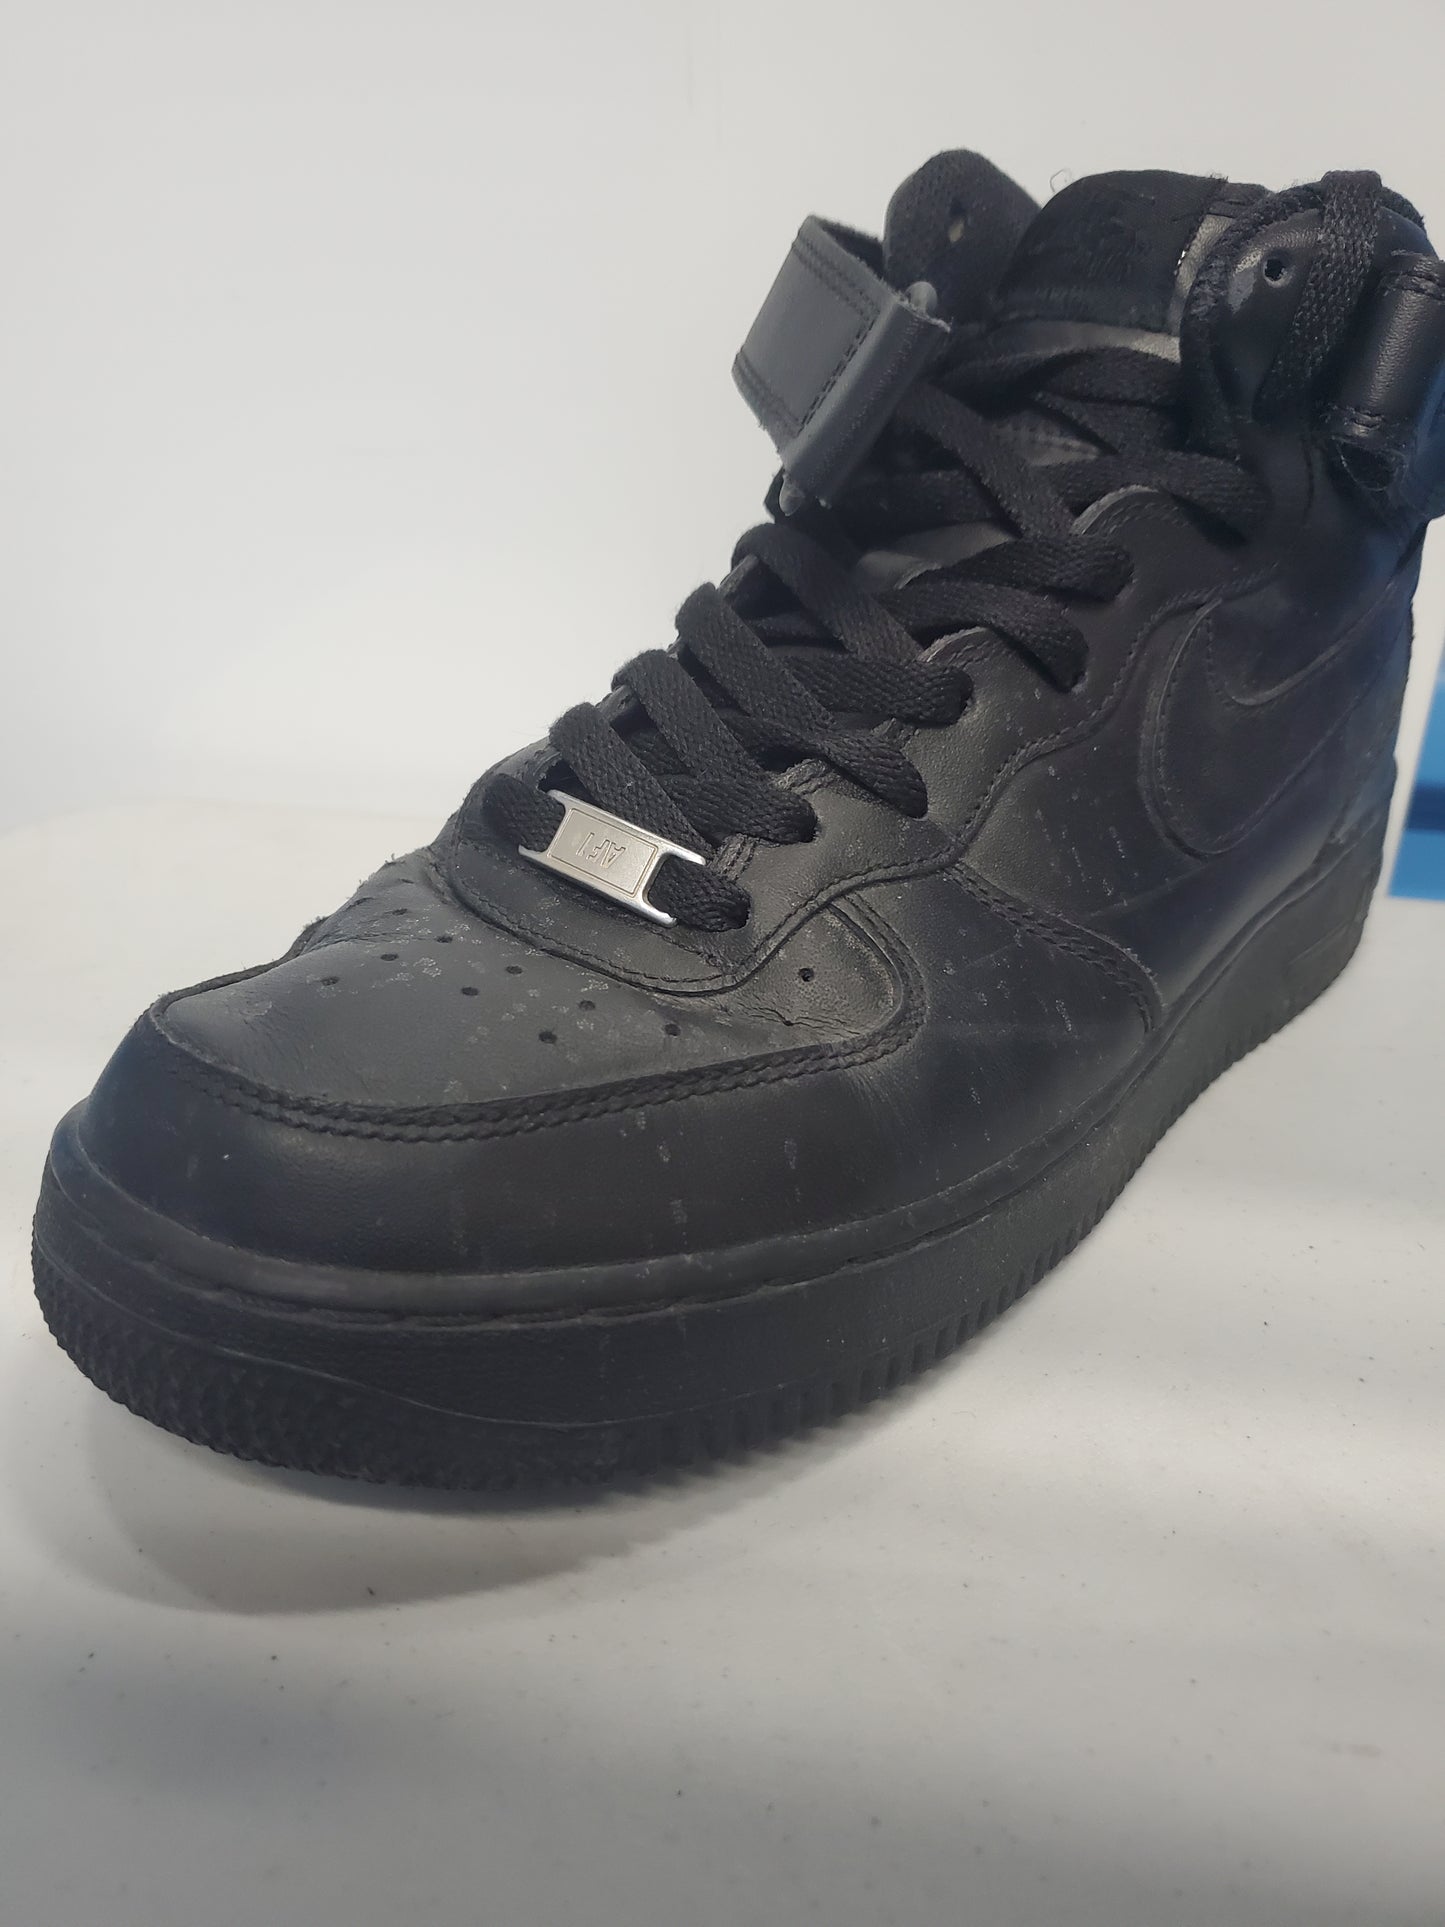 Mens Nike Air Force 1 Mid Black Size 8.5US